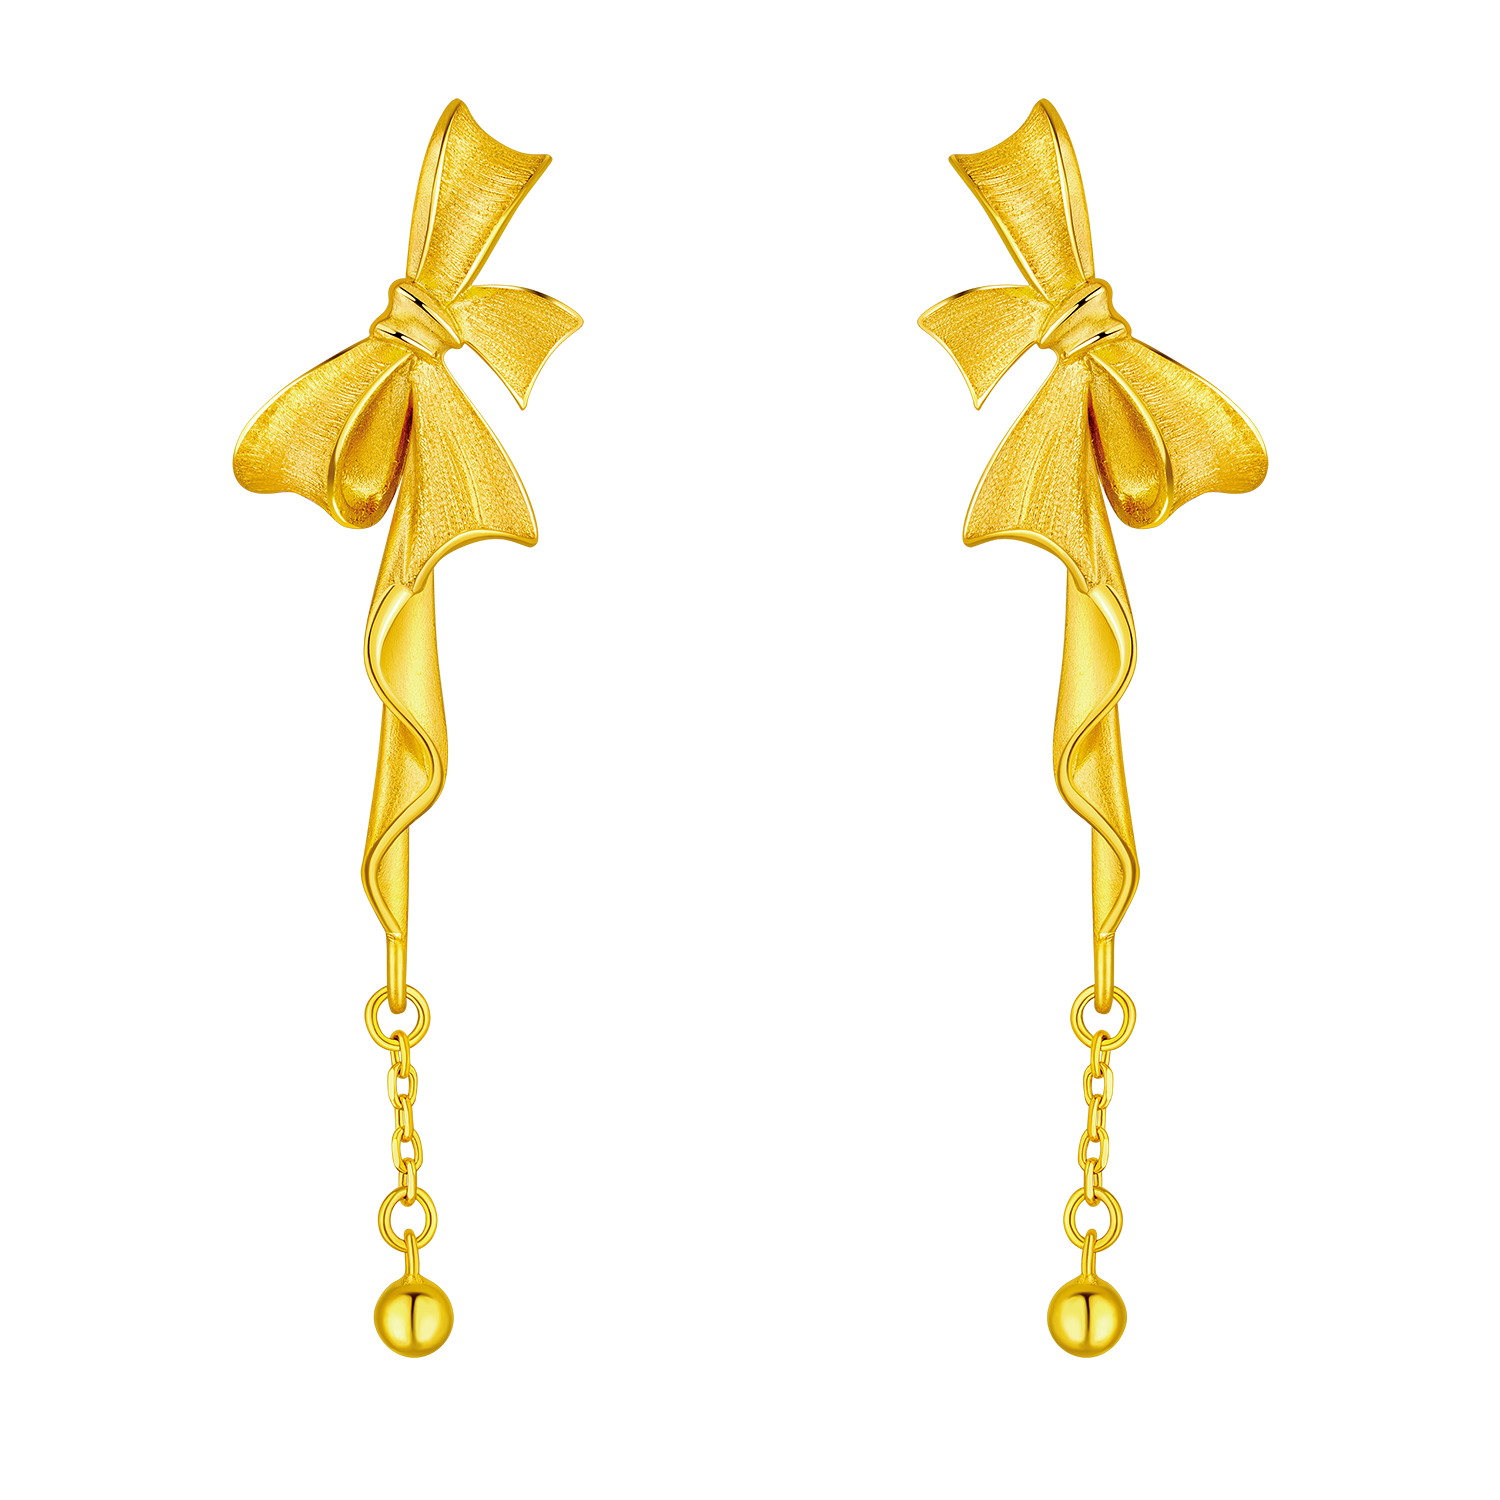 Beloved Collection "Bow of Love " Gold Earrings